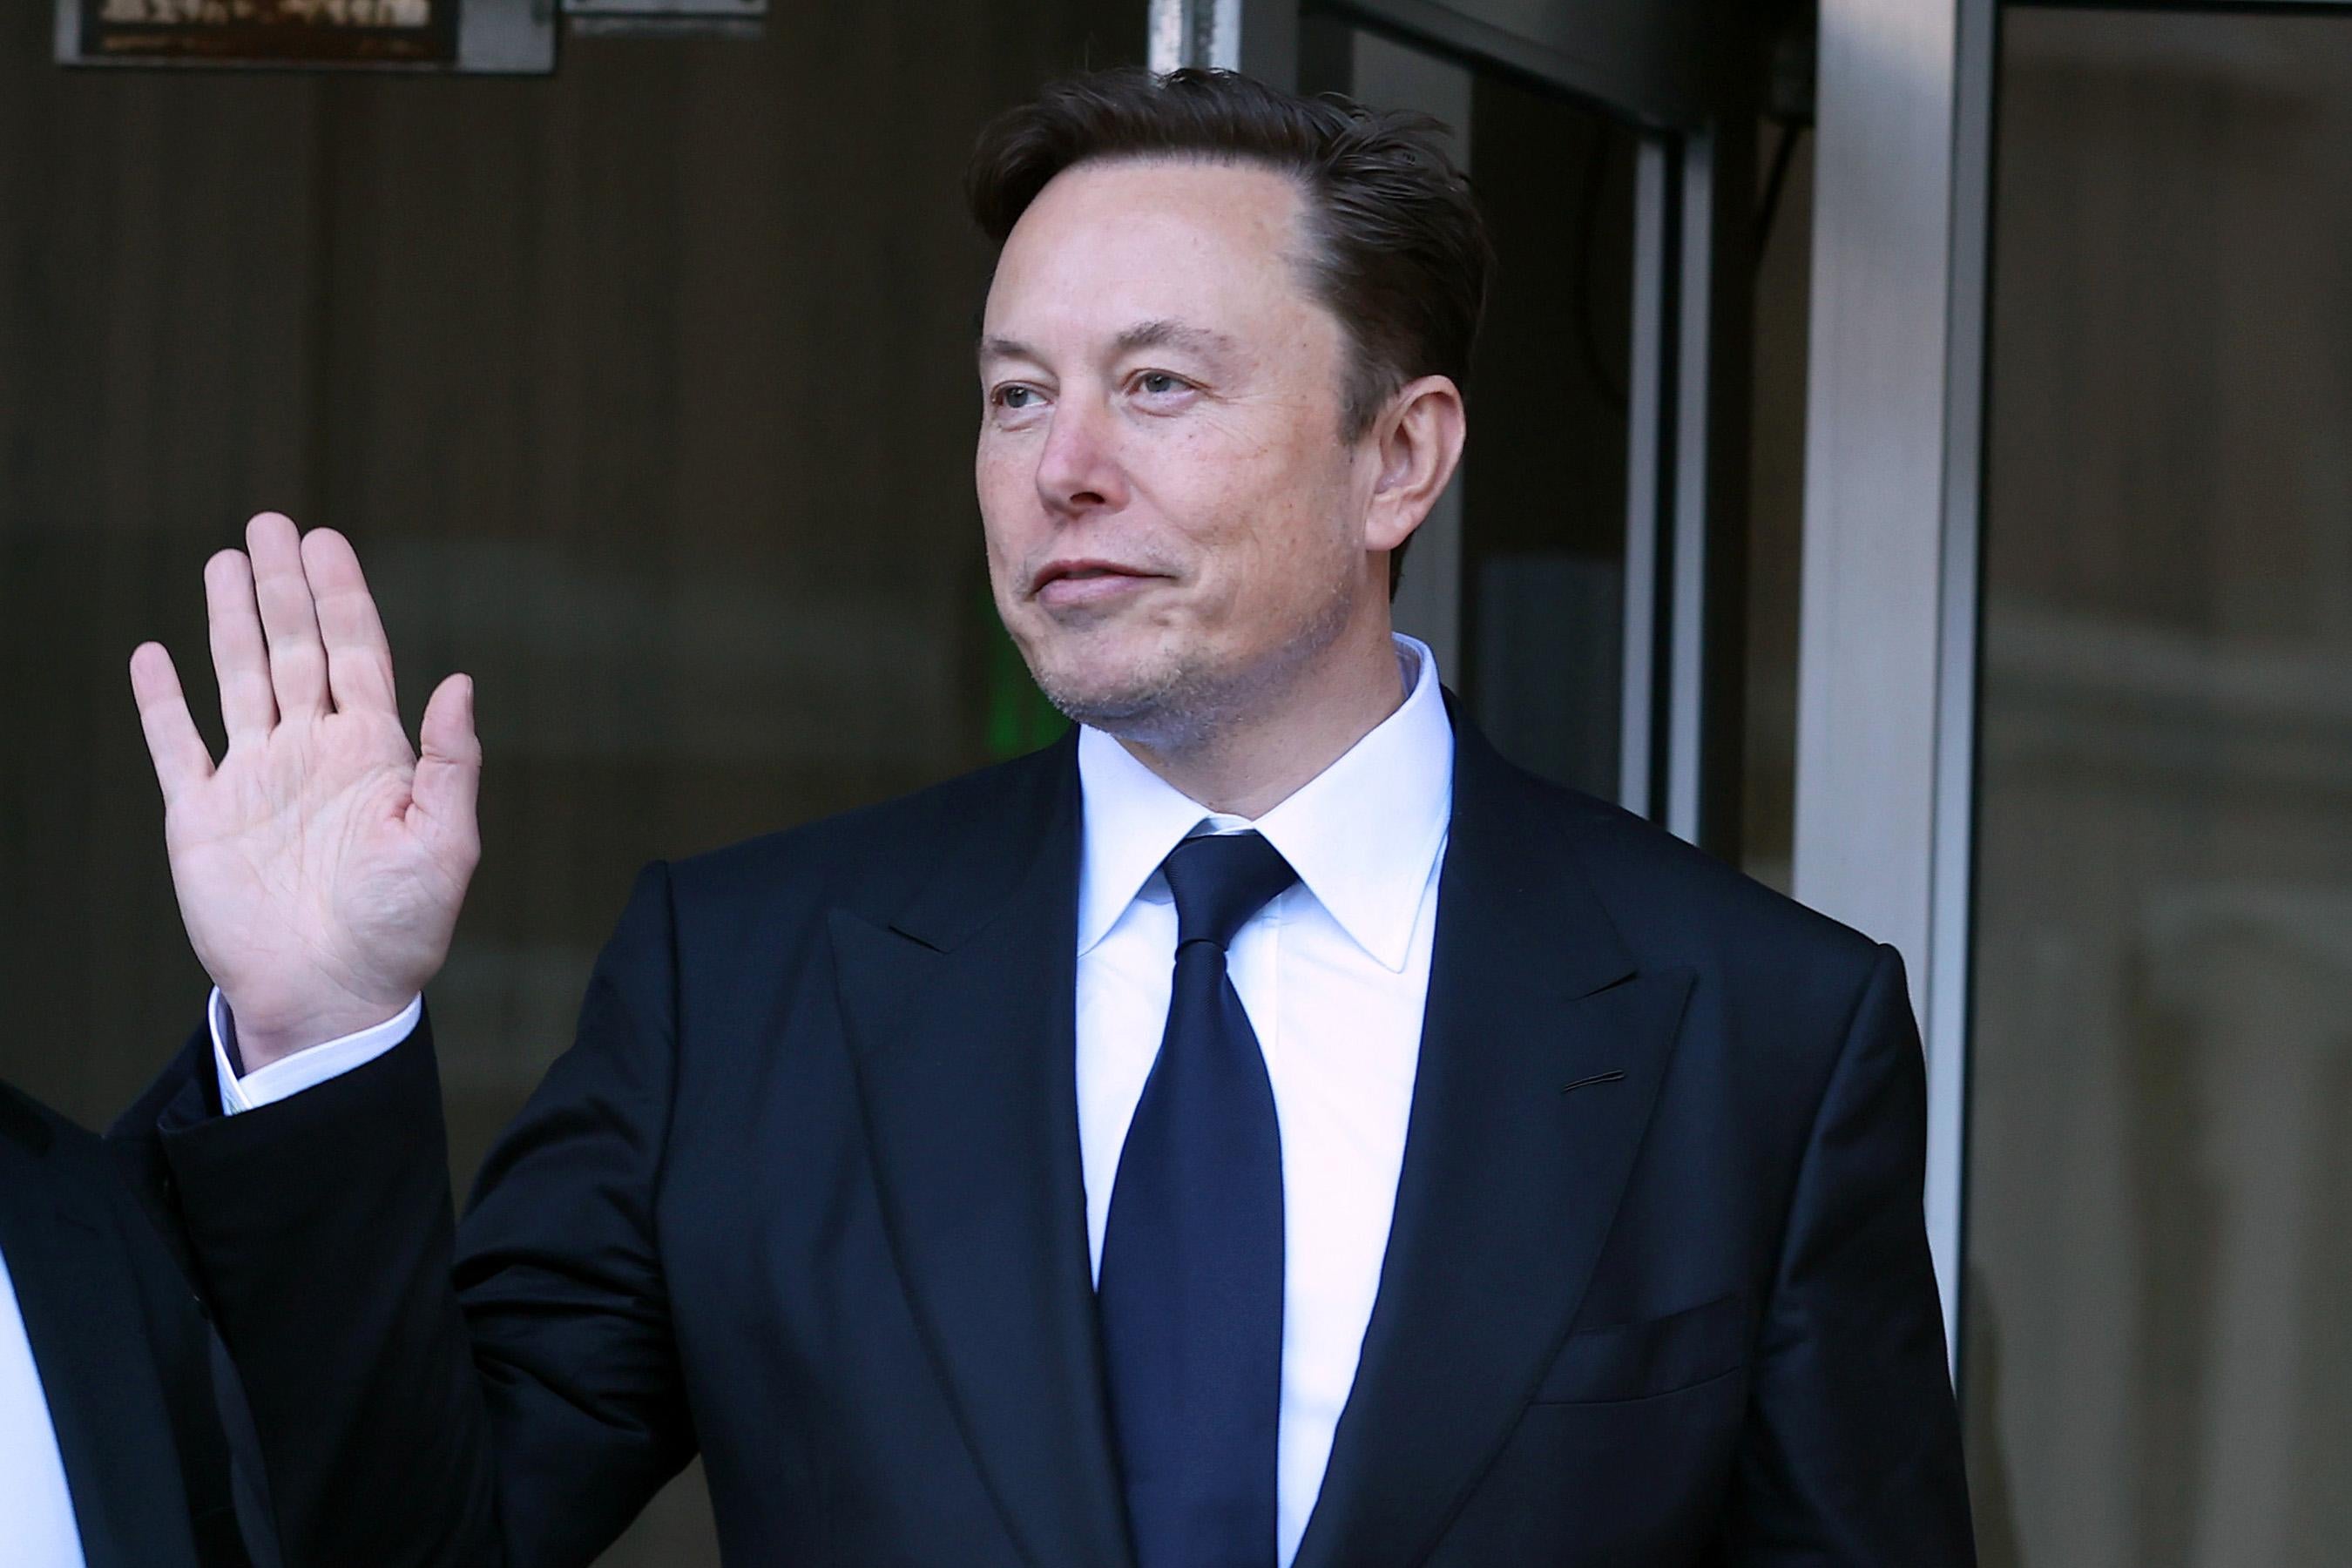 Elon Musk waves as he leaves a building wearing a suit and tie.